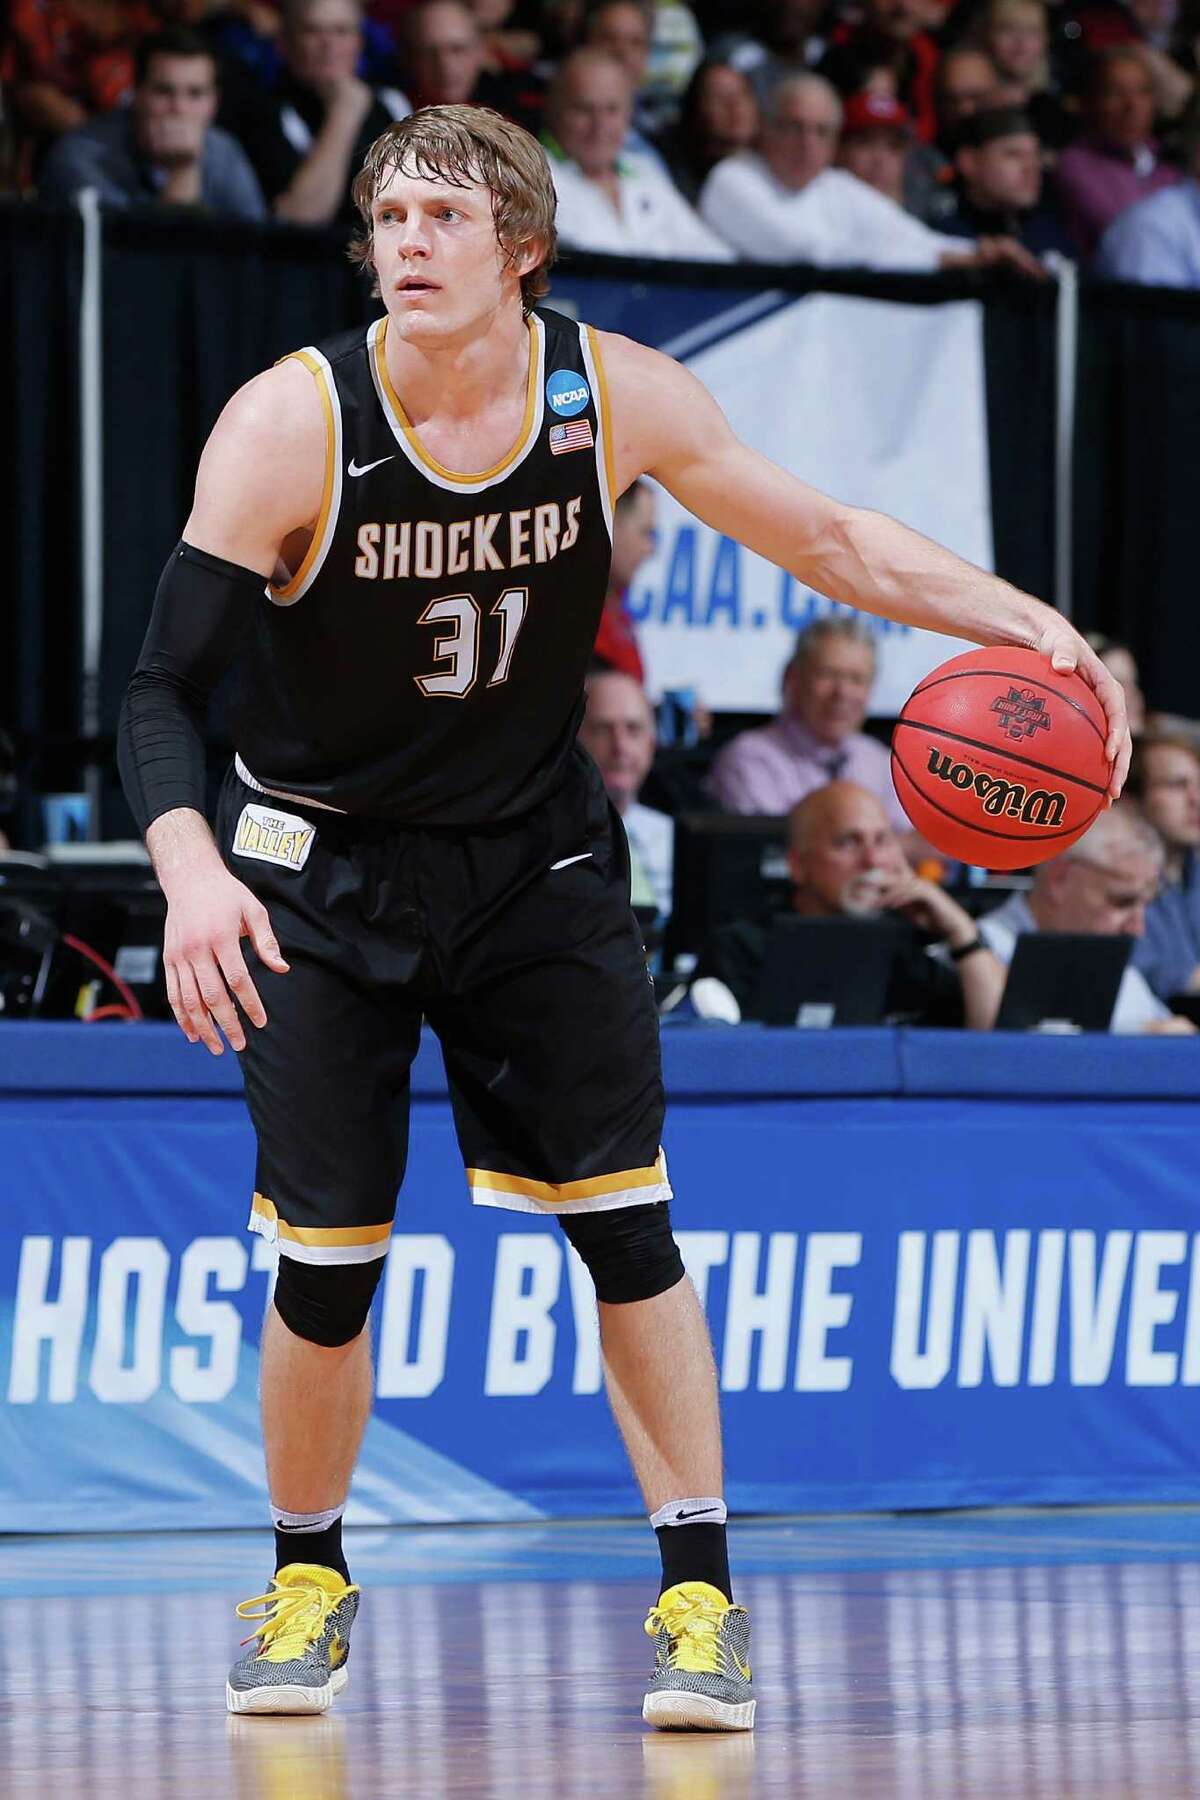 DAYTON, OH - MARCH 15: Ron Baker #31 of the Wichita State Shockers handles the ball in the first half against the Vanderbilt Commodores during the first round of the 2016 NCAA Men's Basketball Tournament at UD Arena on March 15, 2016 in Dayton, Ohio.